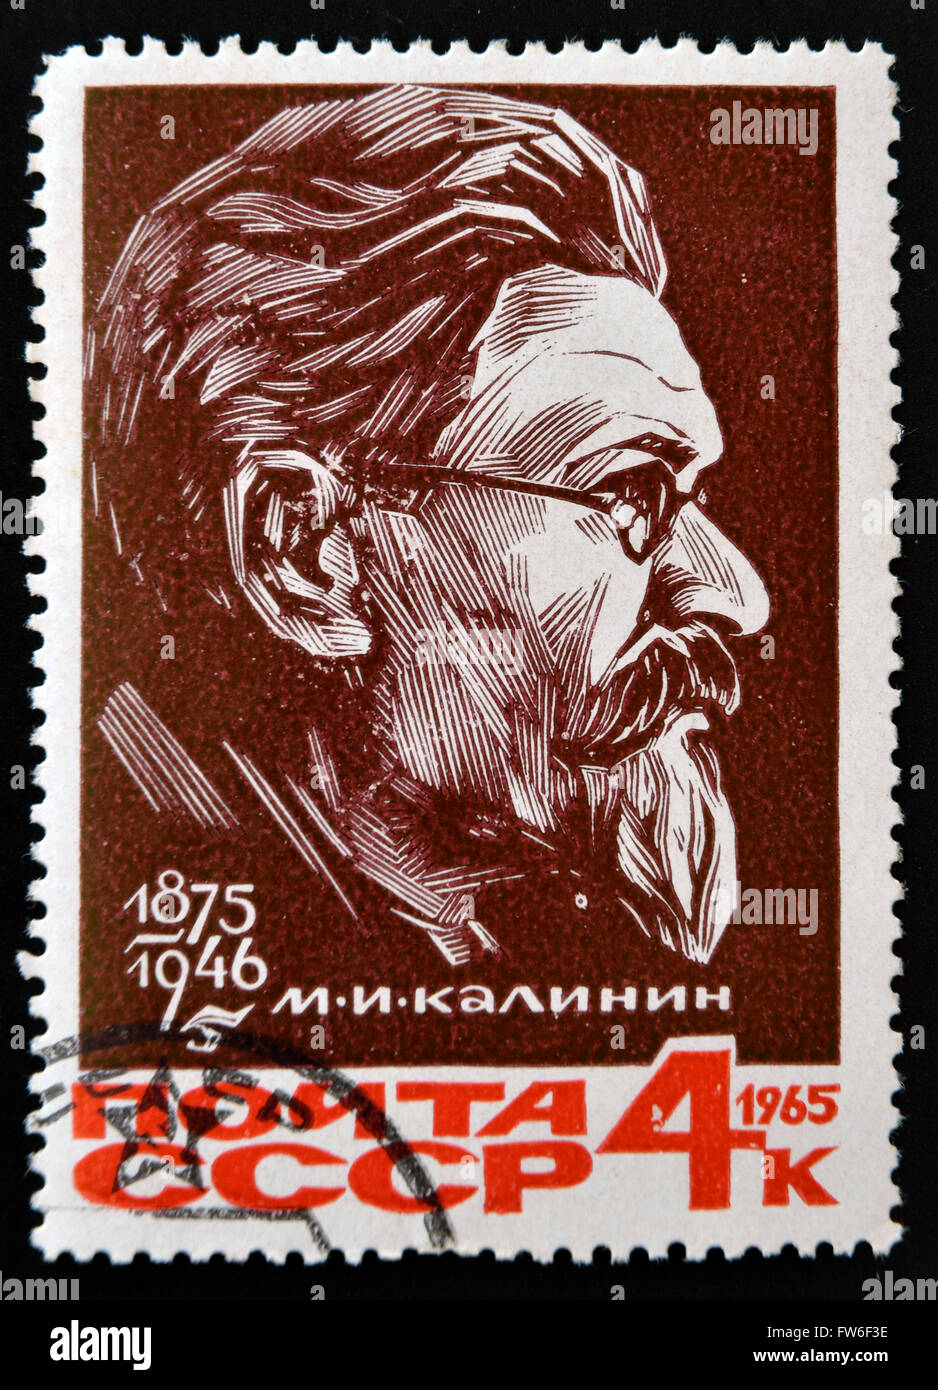 RUSSIA - CIRCA 1965: stamp printed in Russia shows Mikhail Kalinin, USSR President, circa 1965 Stock Photo